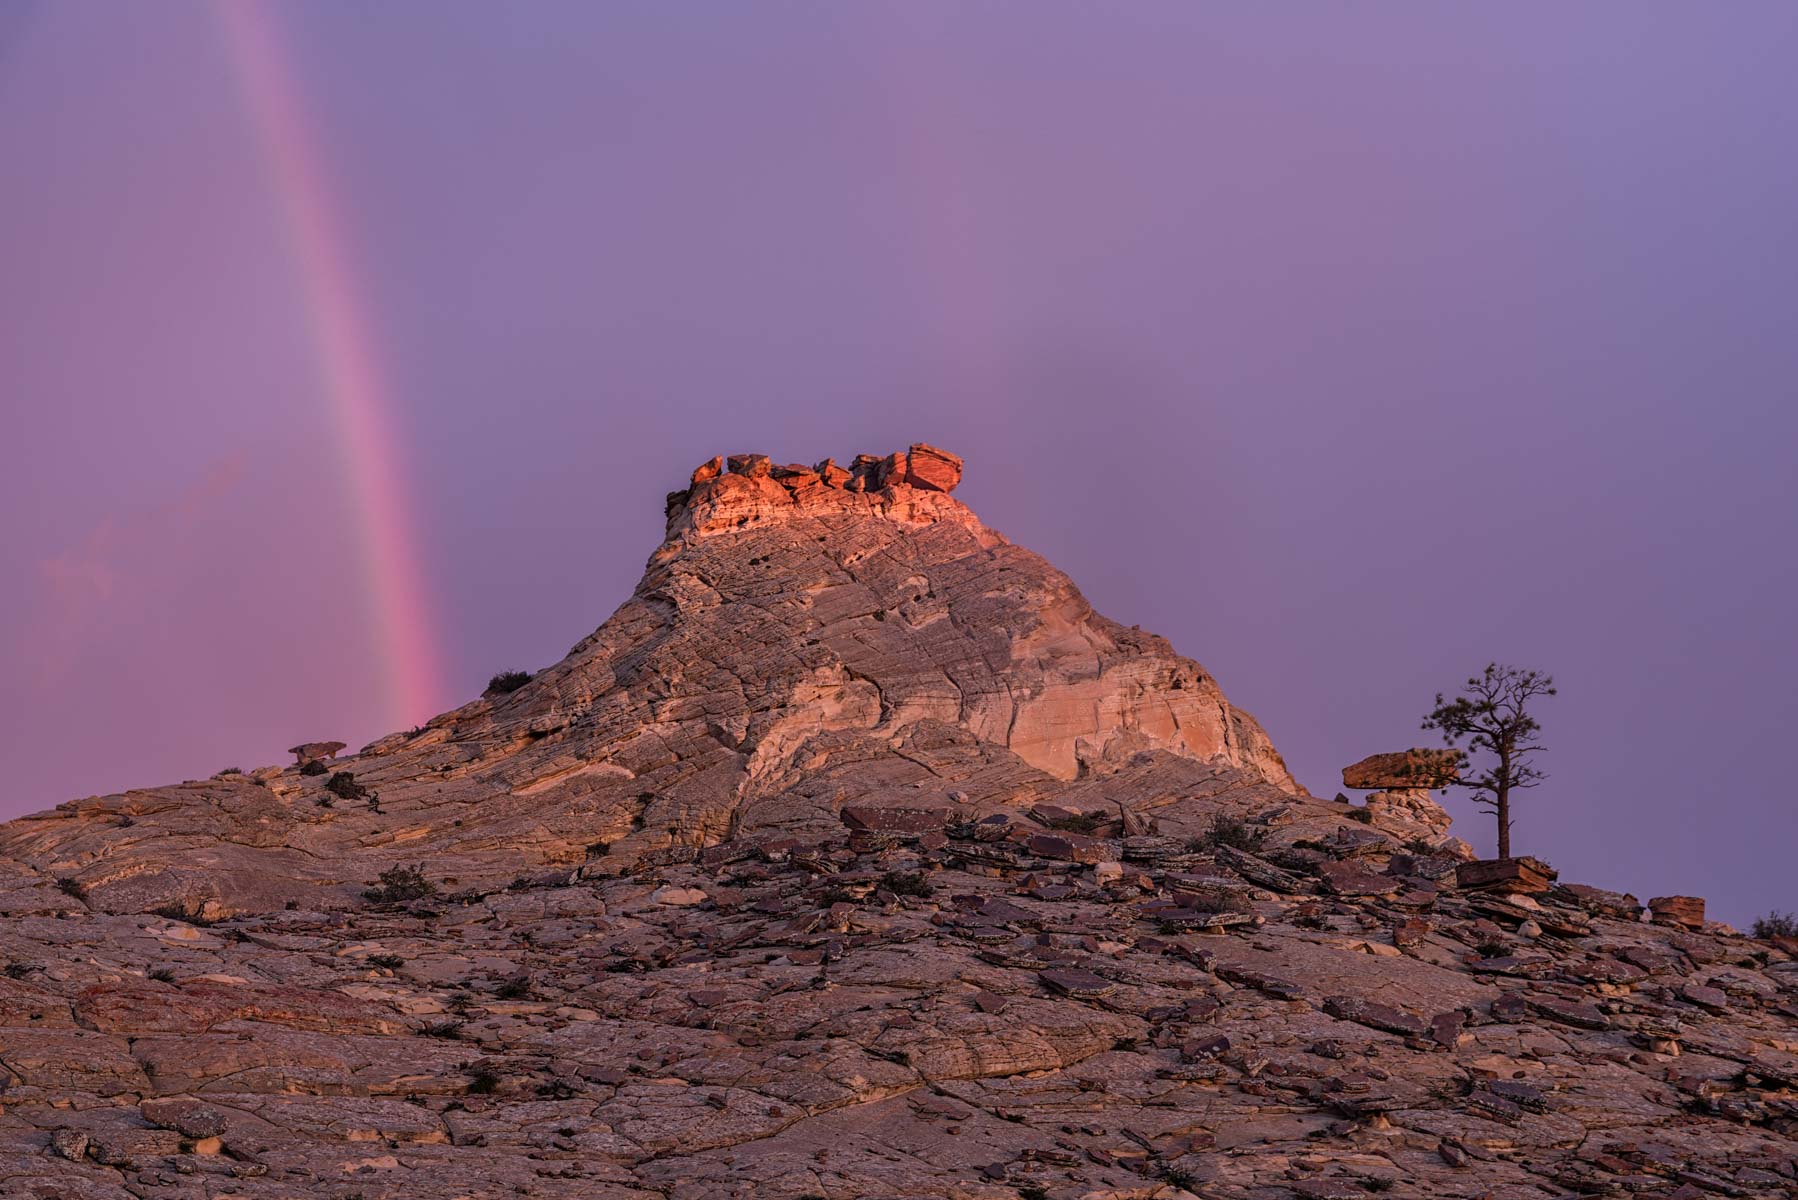 Soap Creek Tank and Rainbow in Vermilion Cliffs National Monument